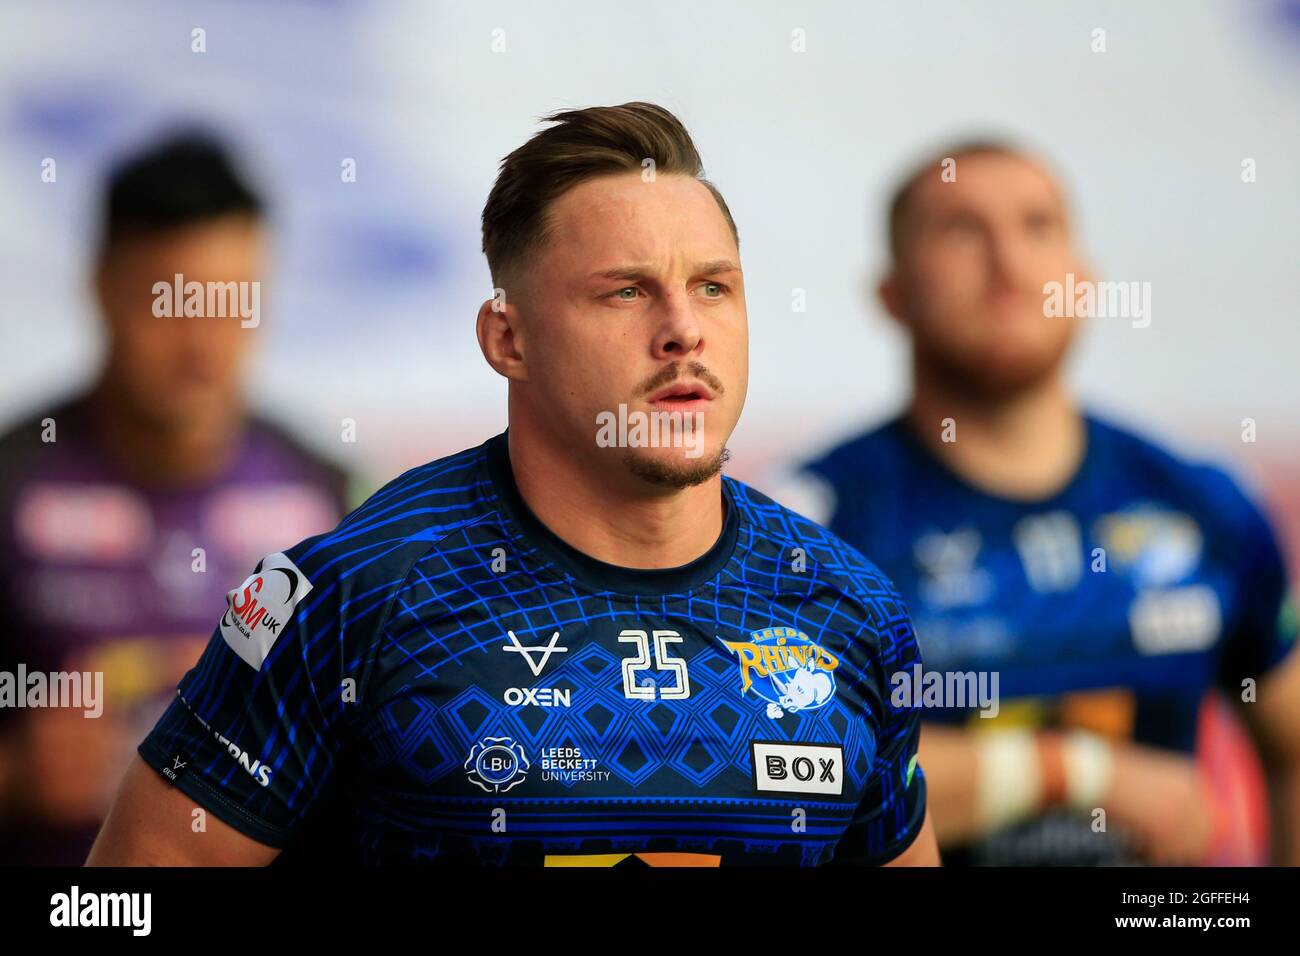 Wigan, UK. 25th Aug, 2021. James Donaldson (25) of Leeds Rhinos during the warm up for the game in Wigan, United Kingdom on 8/25/2021. (Photo by Conor Molloy/News Images/Sipa USA) Credit: Sipa USA/Alamy Live News Stock Photo